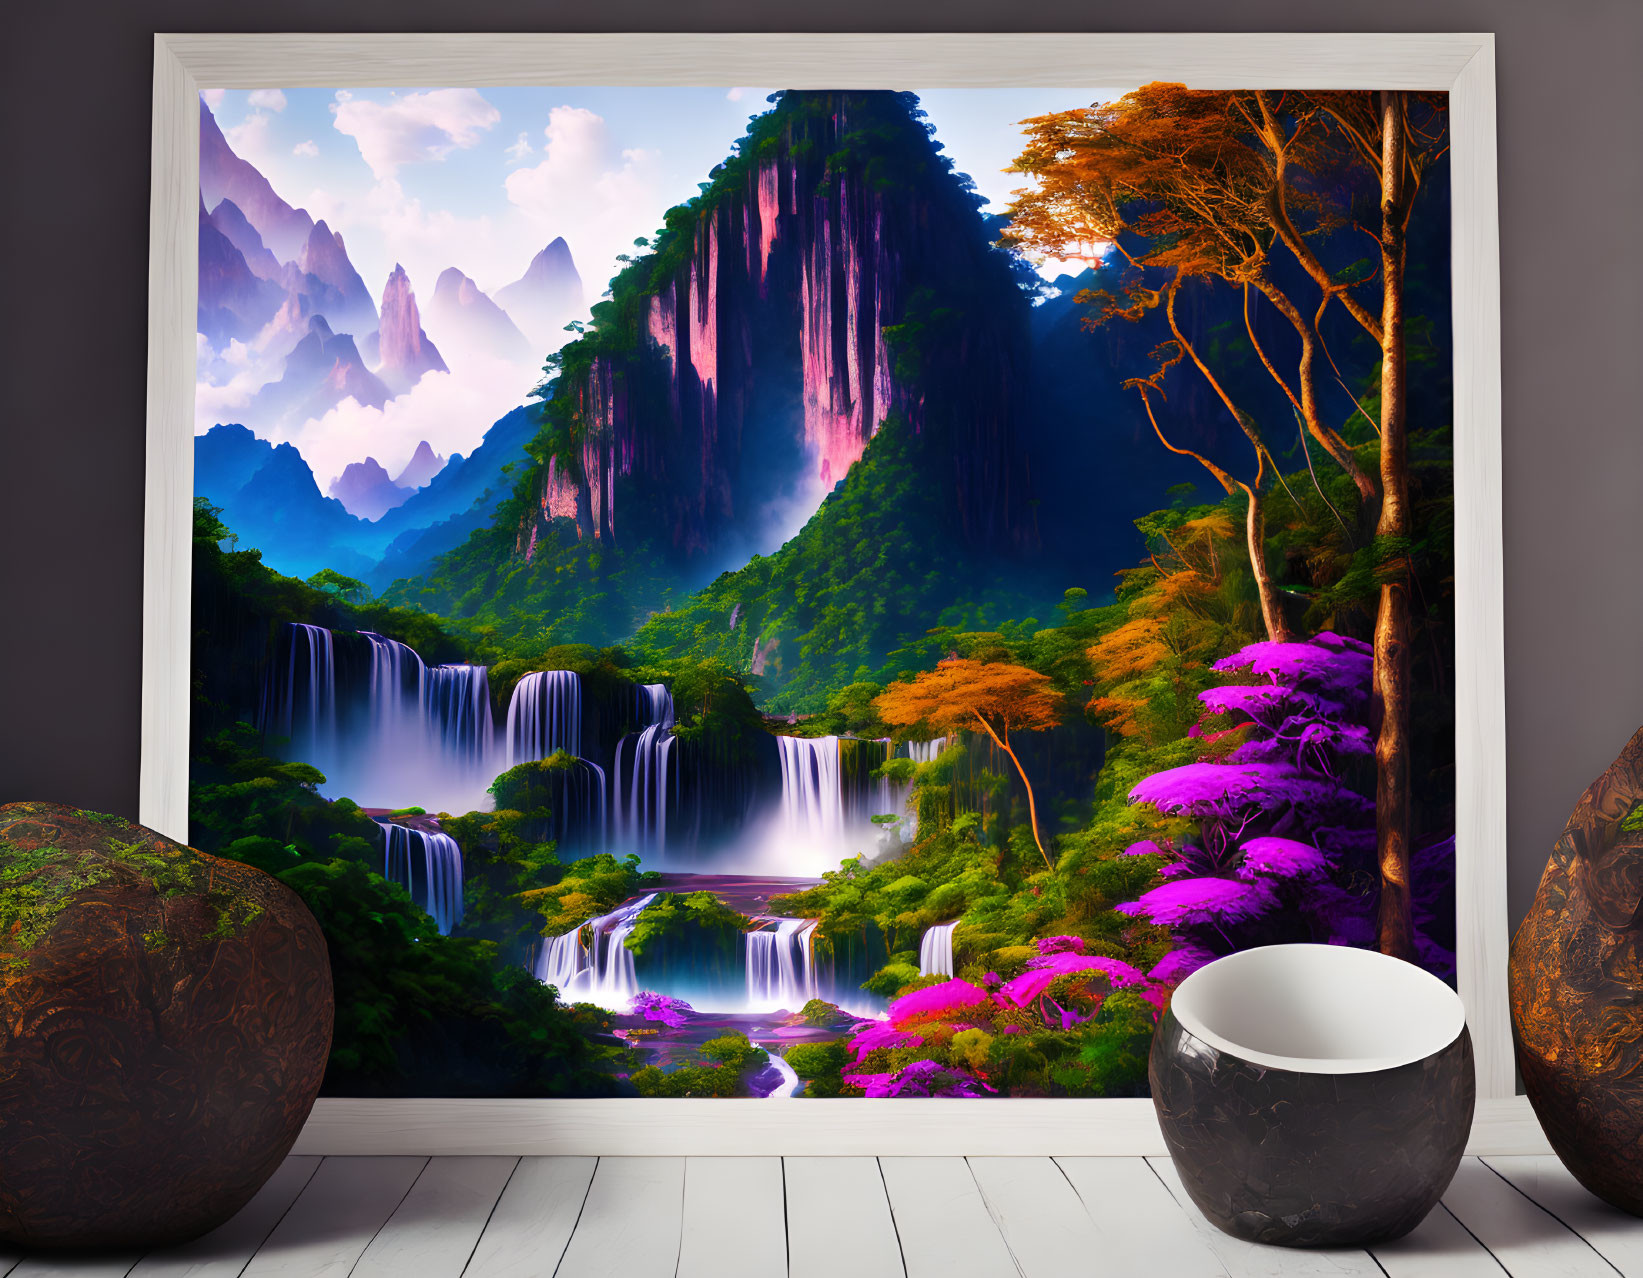 Vibrant room with waterfall wall mural, greenery, and purple flora.